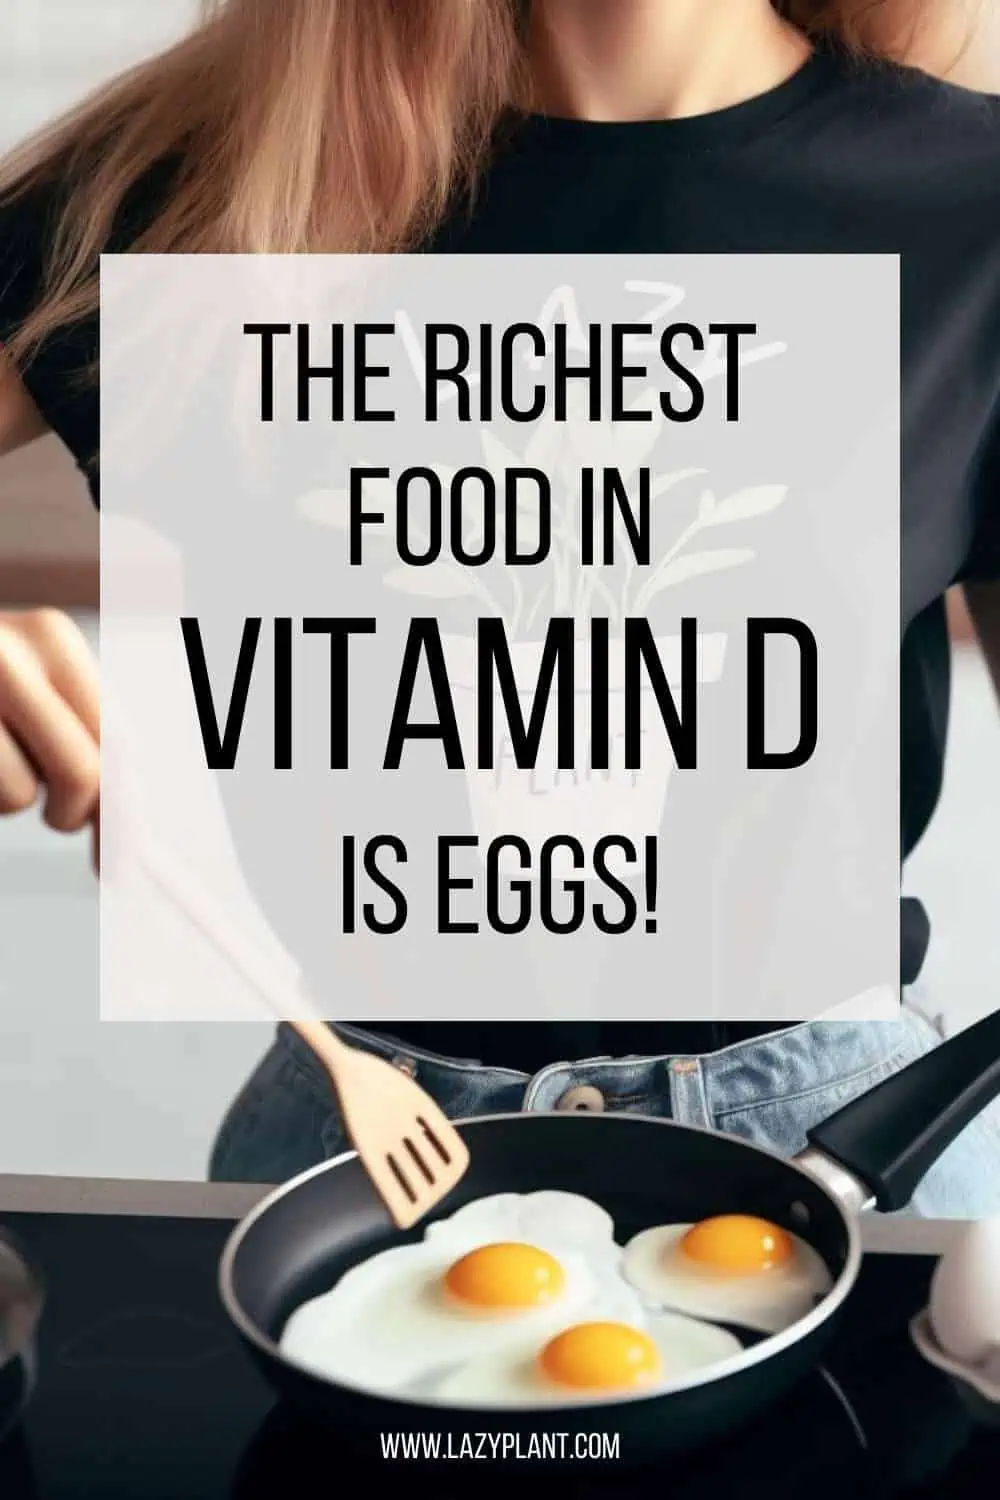 Eat Eggs to boost Vitamin D3 intake.